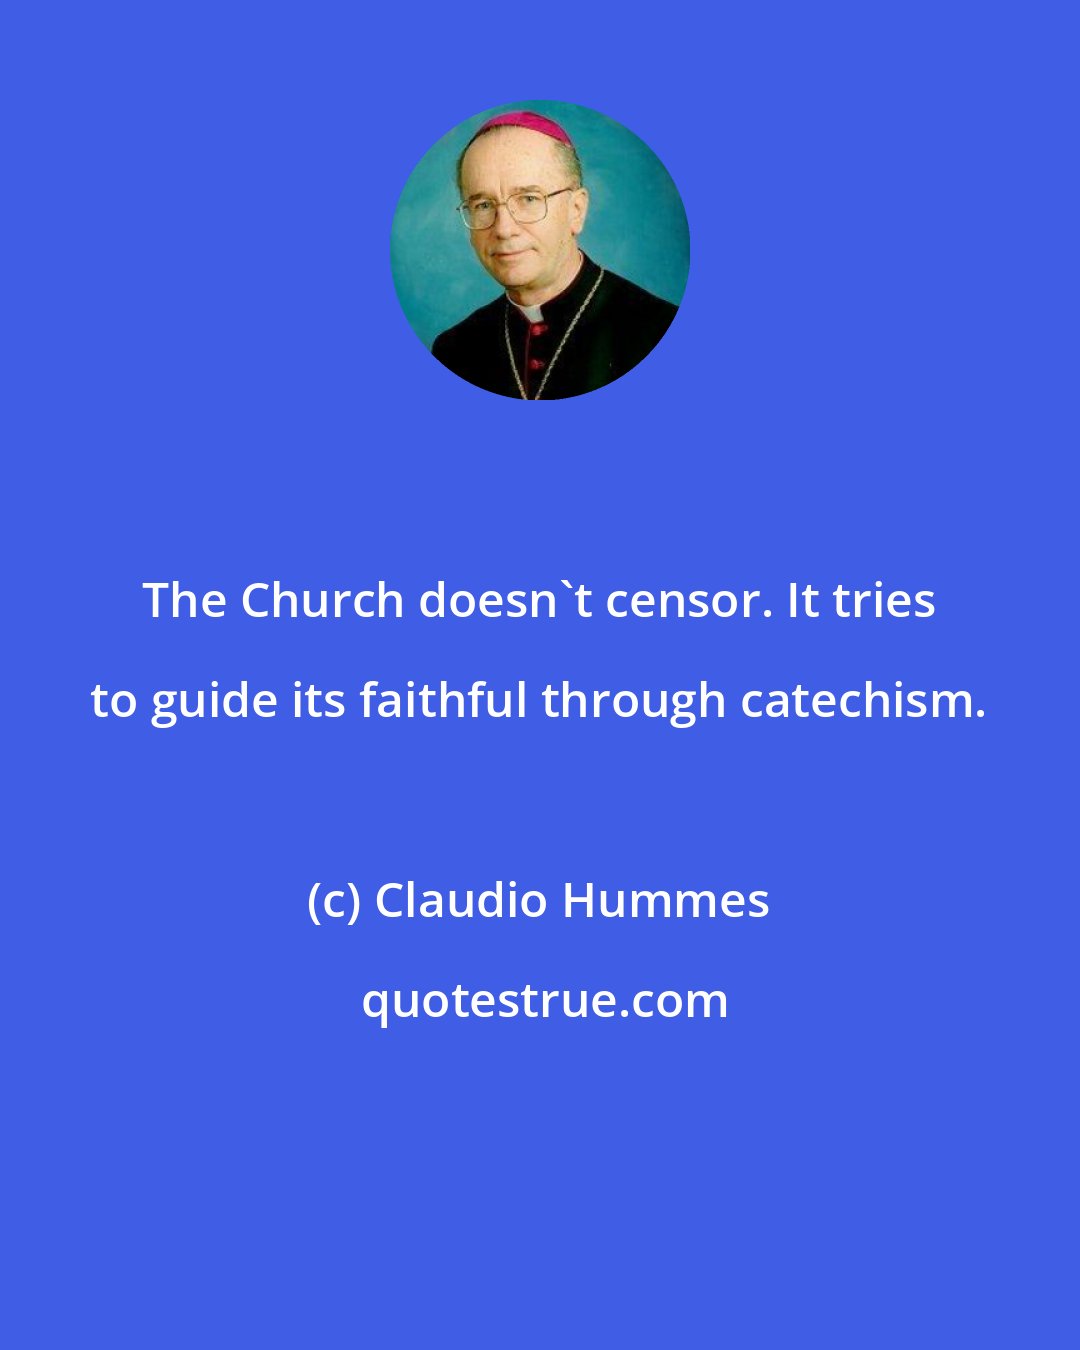 Claudio Hummes: The Church doesn't censor. It tries to guide its faithful through catechism.